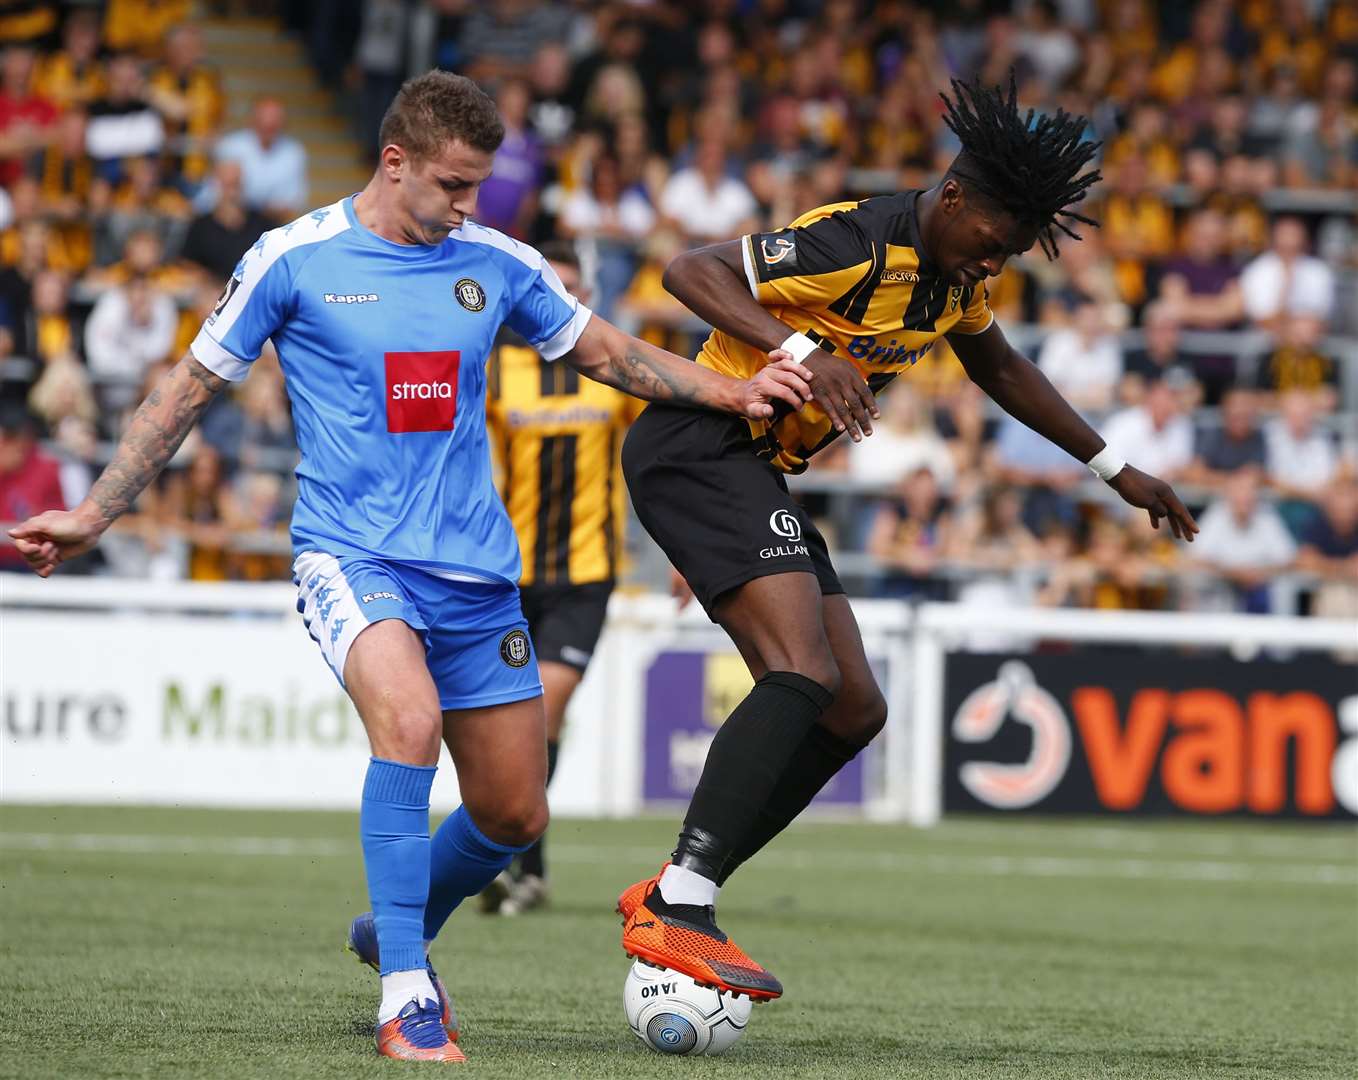 Andre Coker in action against Harrogate - his last Stones appearance before joining Dartford on loan Picture: Andy Jones